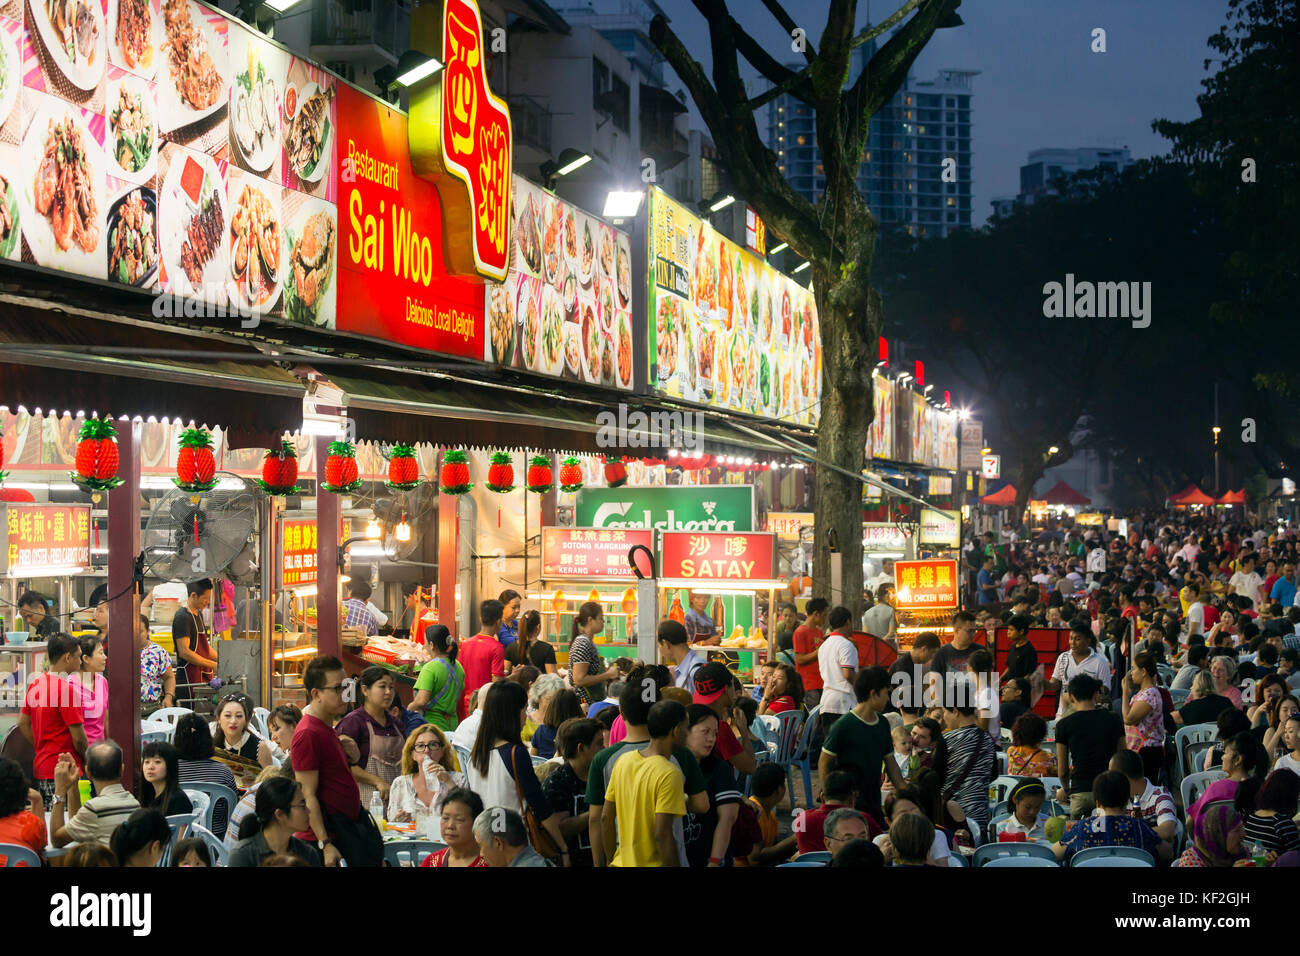 Jalan Alor located in Bukit Bintang is a well known and famous street food destination in Kuala Lumpur, Malaysia. Stock Photo